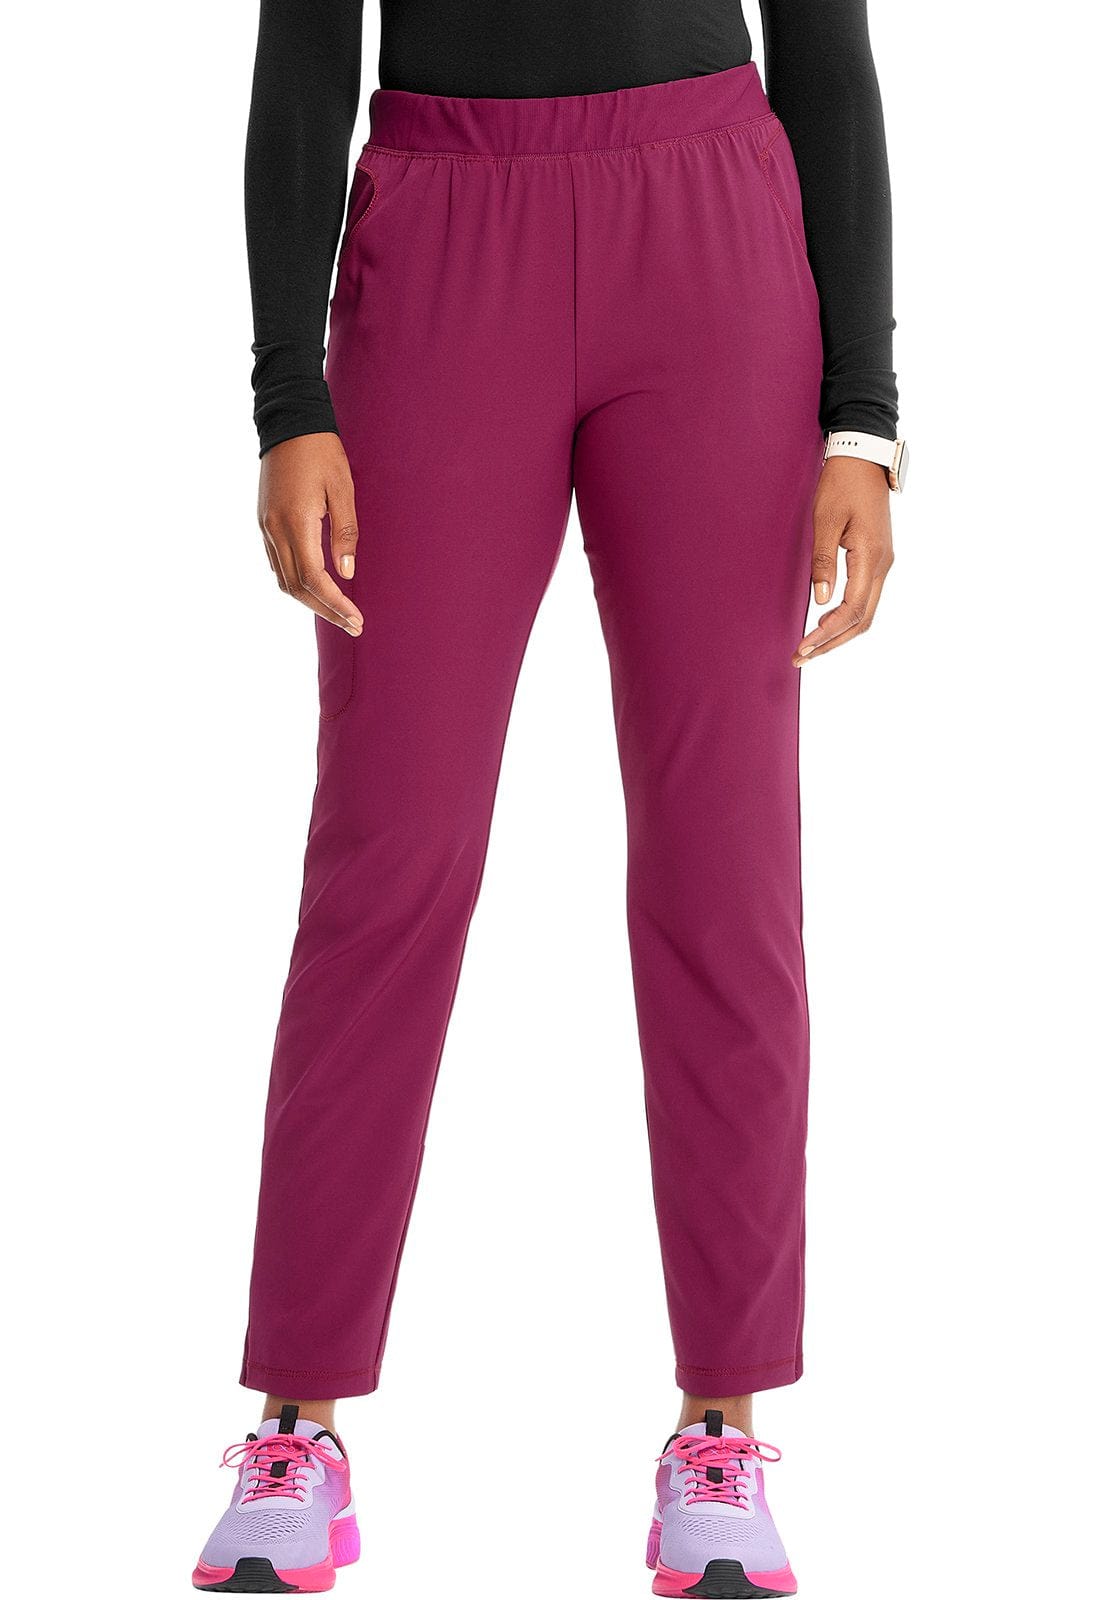 Infinity Infinity GNR8 Wine / XS Infinity GNR8 Tall Mid-rise Tapered Leg Pant IN120AT